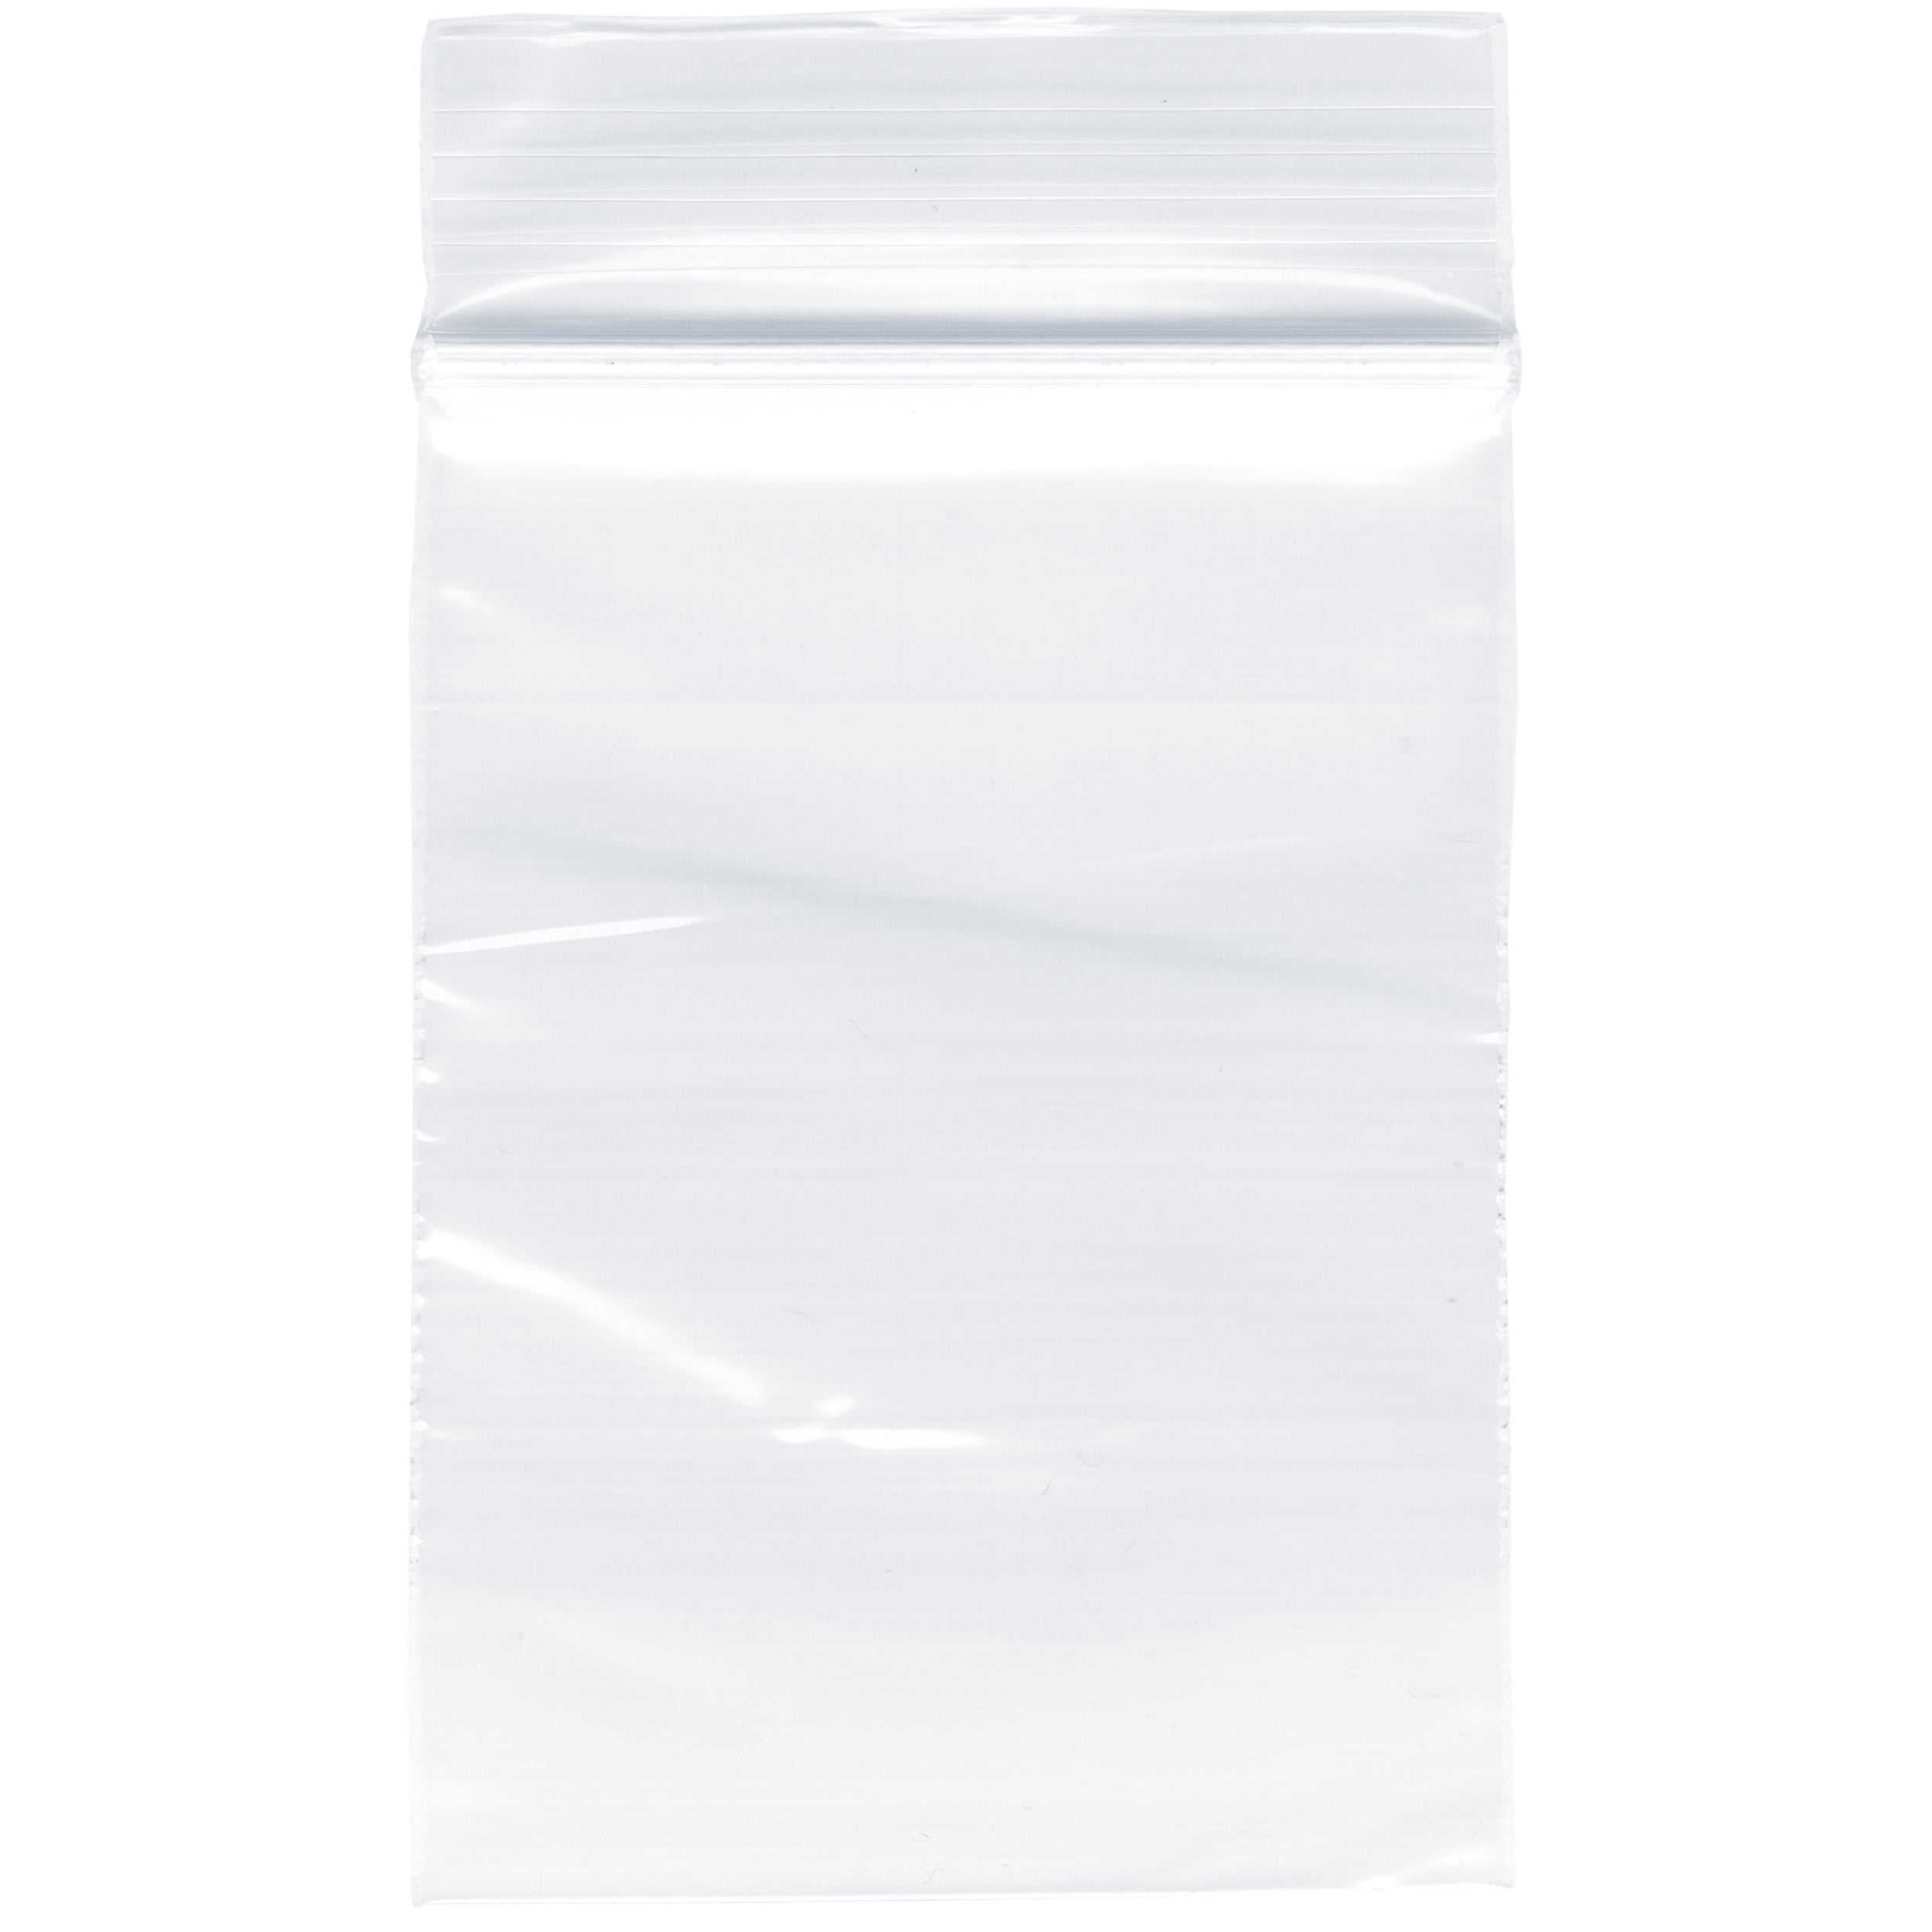 9 x 14 100 Clear Cello Bags Adhesive 1.4 mils Self Sealing OPP